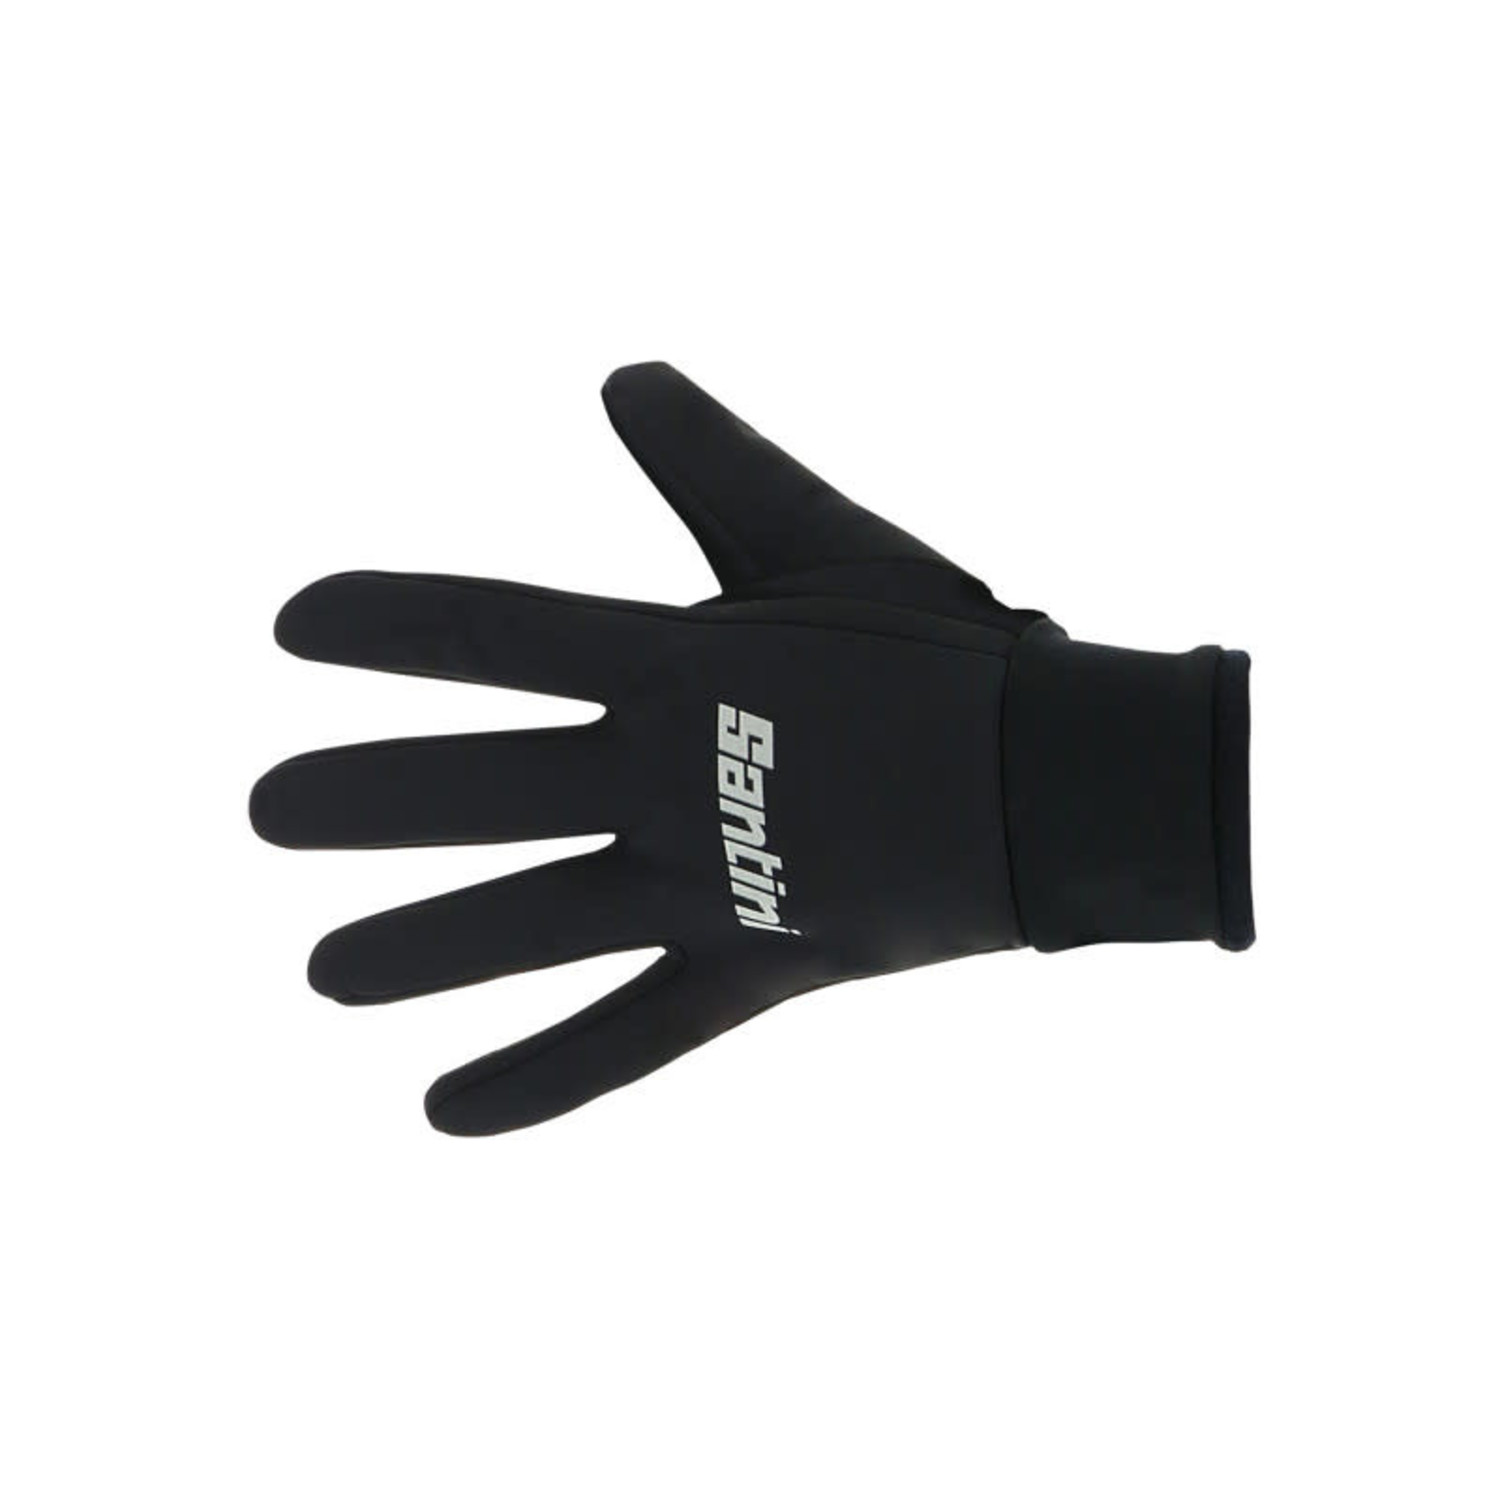 ECO WINTER GLOVES - Extreme Sports